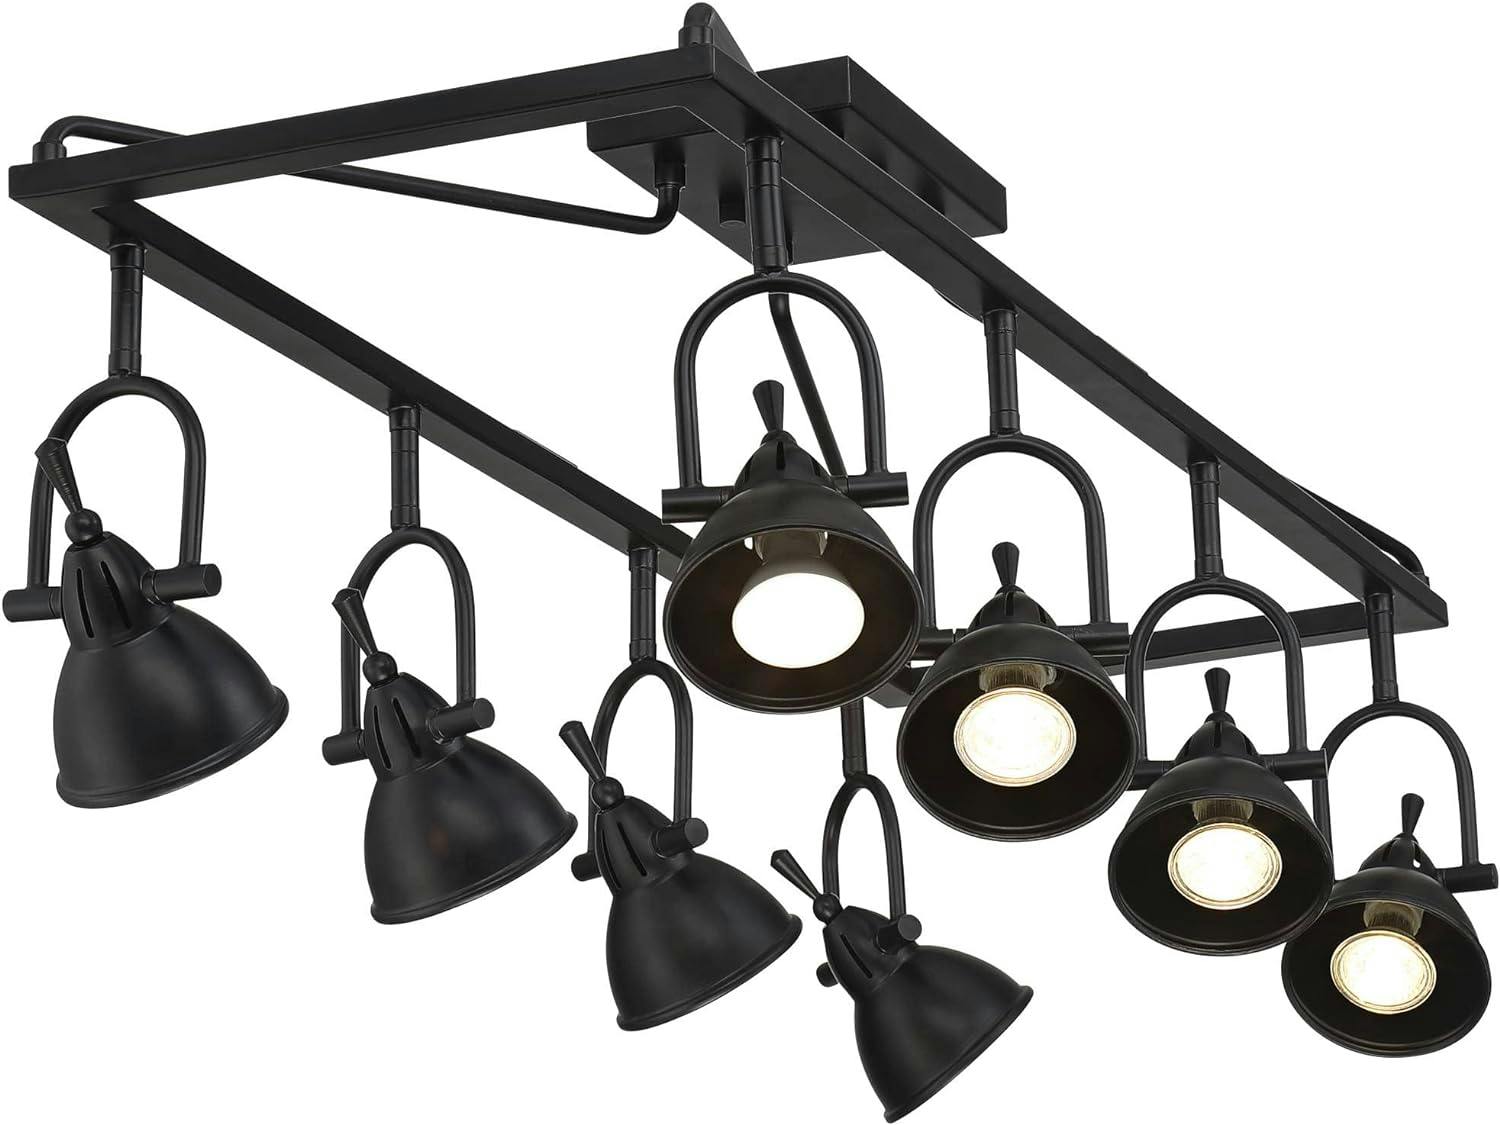 Kane 8-Head LED Swivel Cage Track Light in Brown Bronze Finish